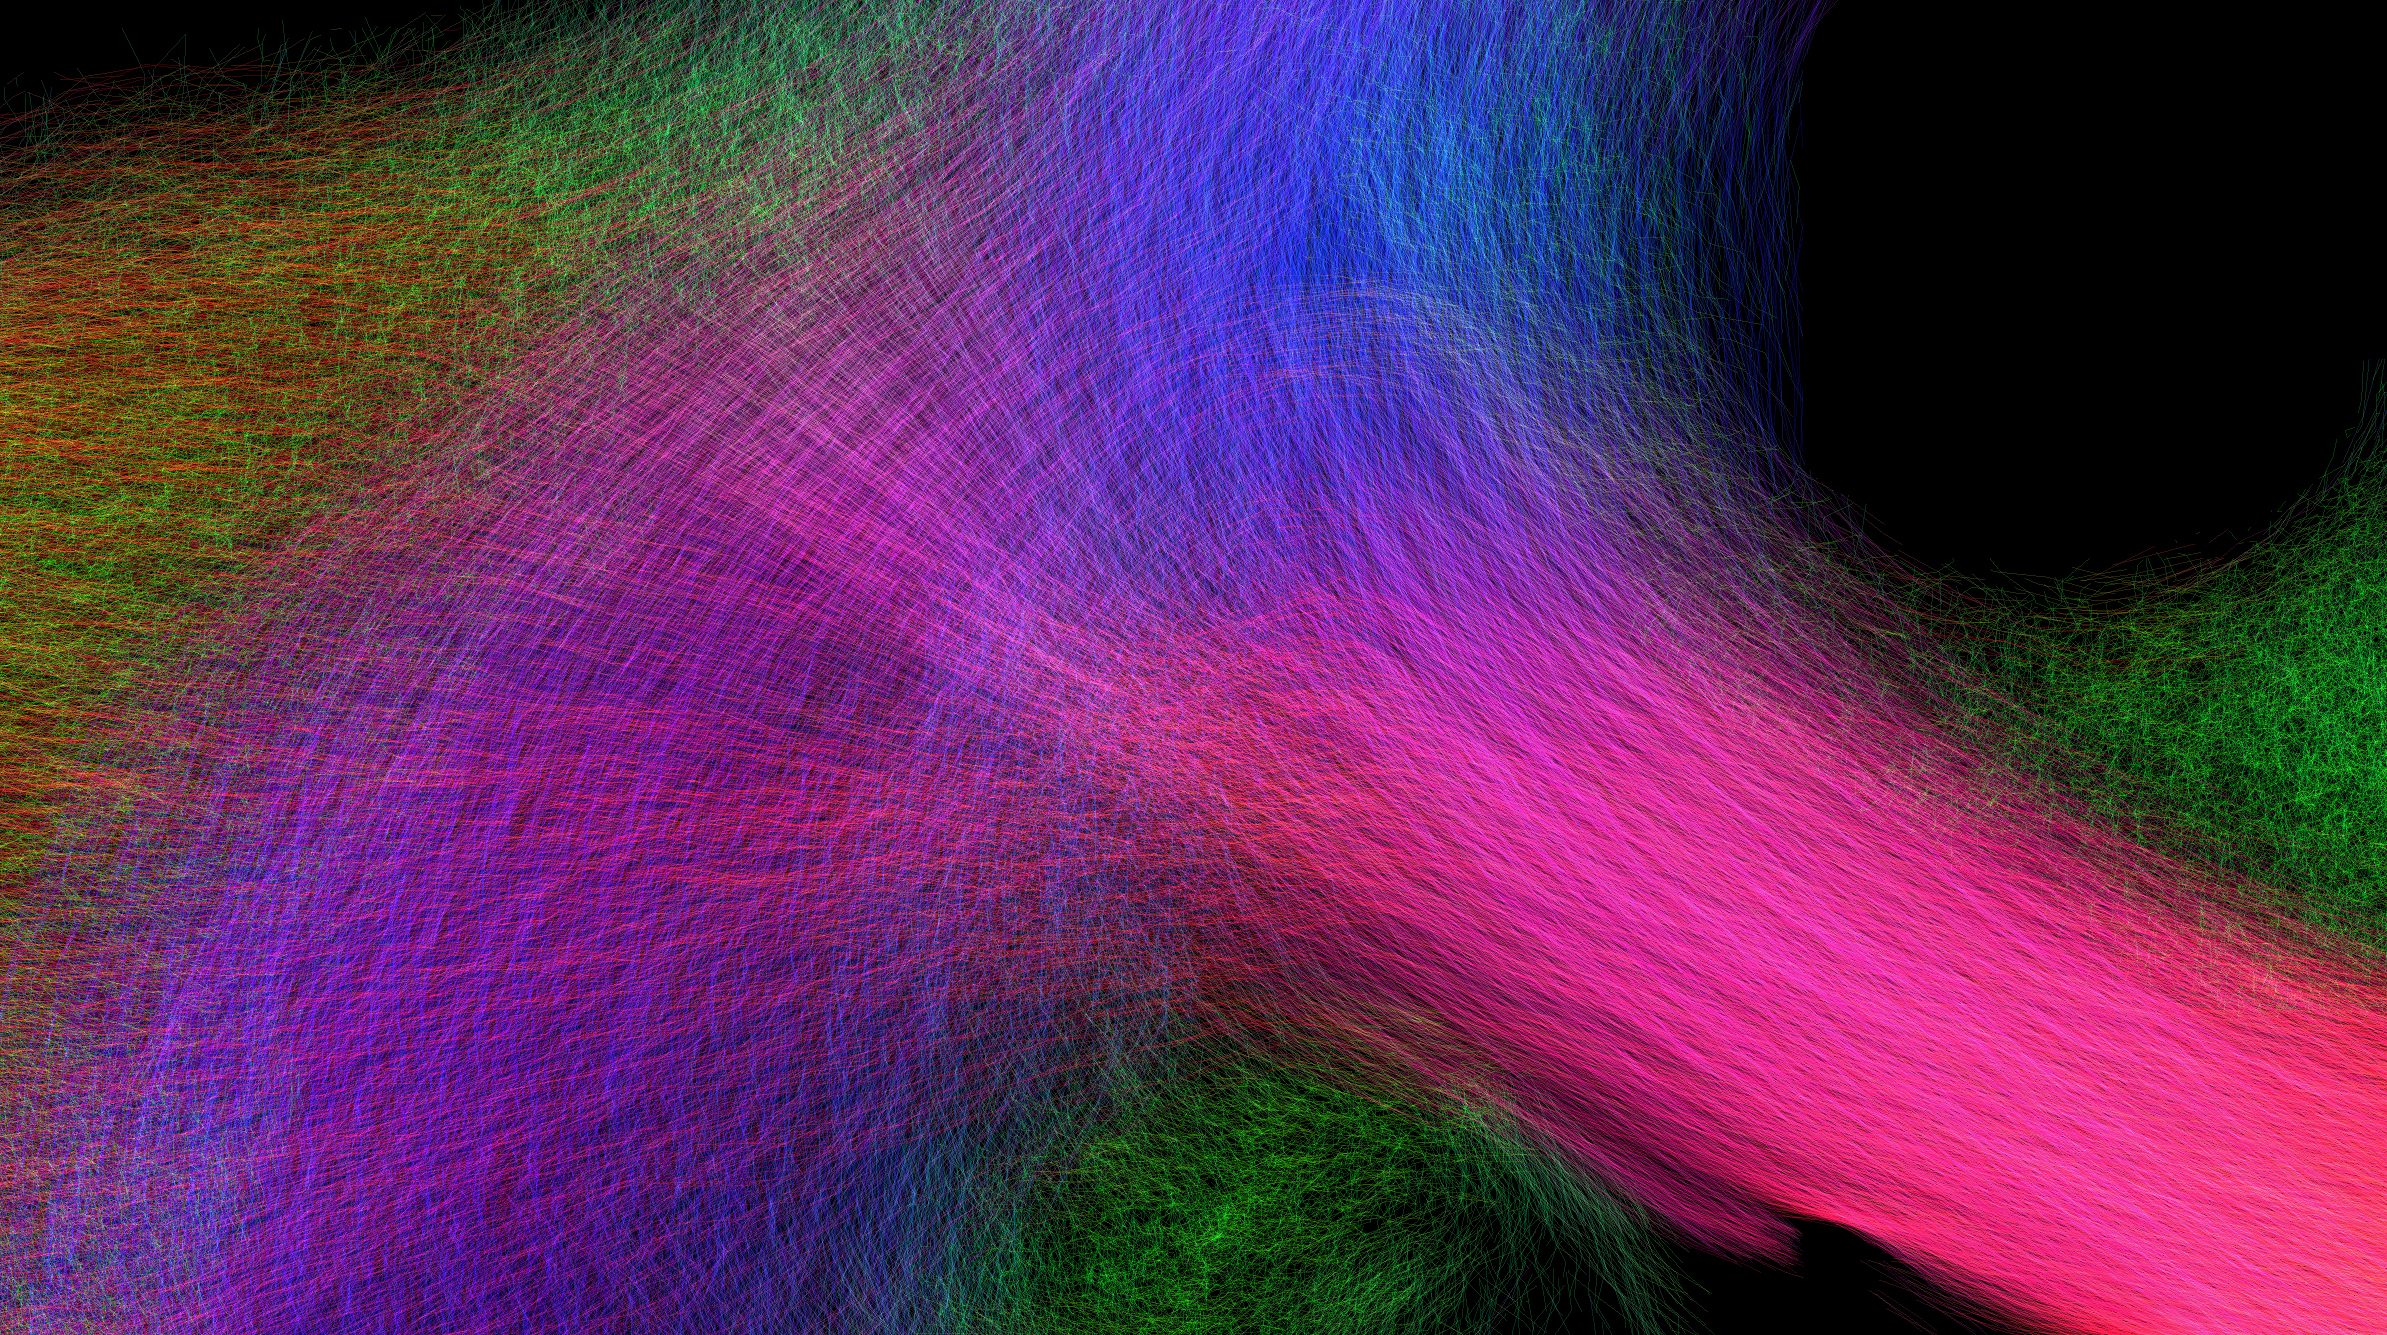 A multicolored visualization that represents the nerve tracts in a human brain.